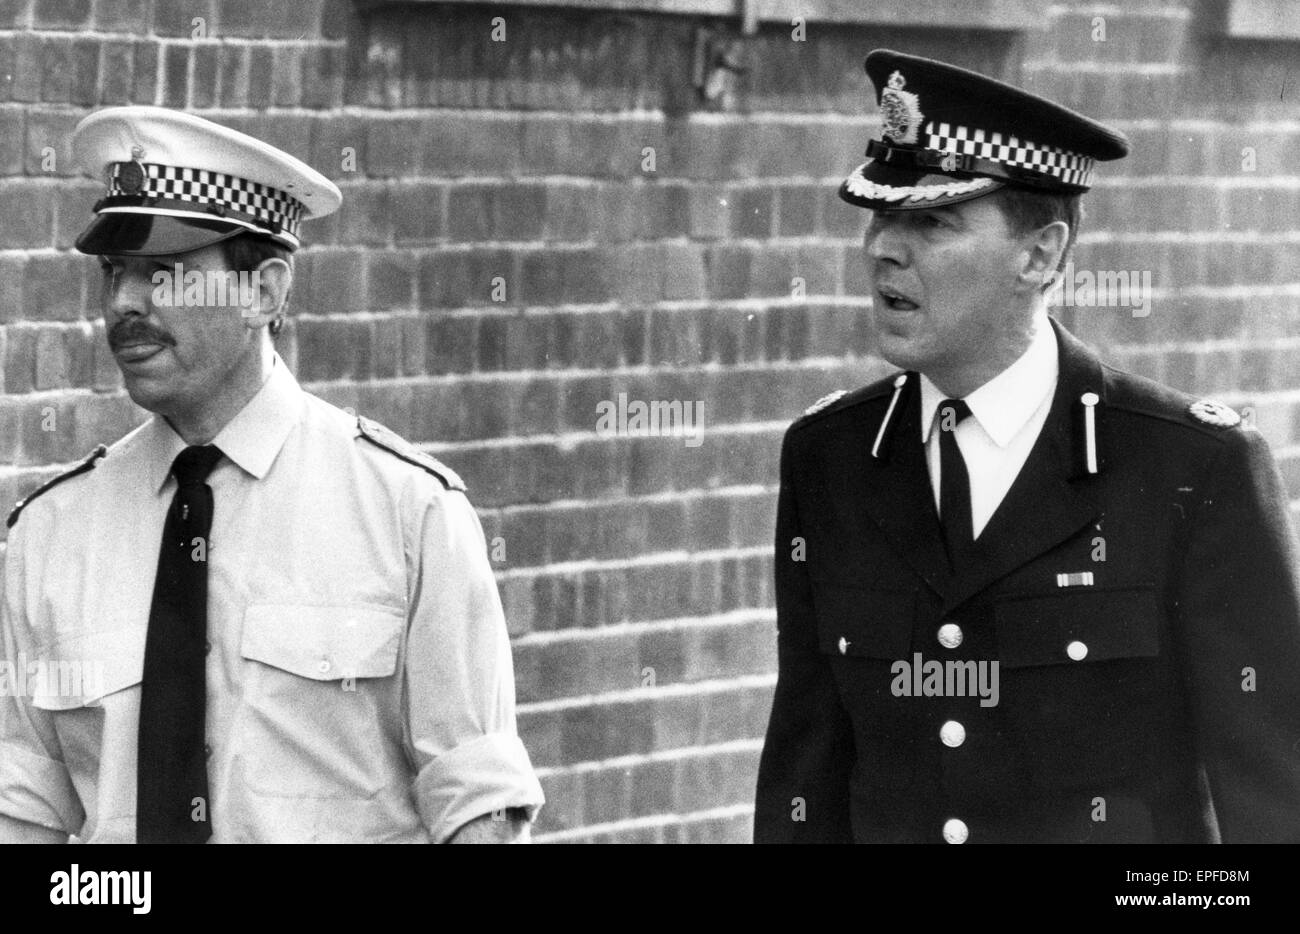 Strangeways Prison Riot April 1990. Assistant Chief Constable.  A 25-day prison riot and rooftop protest at Strangeways Prison in Manchester, England. The riot began on the 1st April 1990 when prisoners took control of the prison chapel, and the riot quic Stock Photo